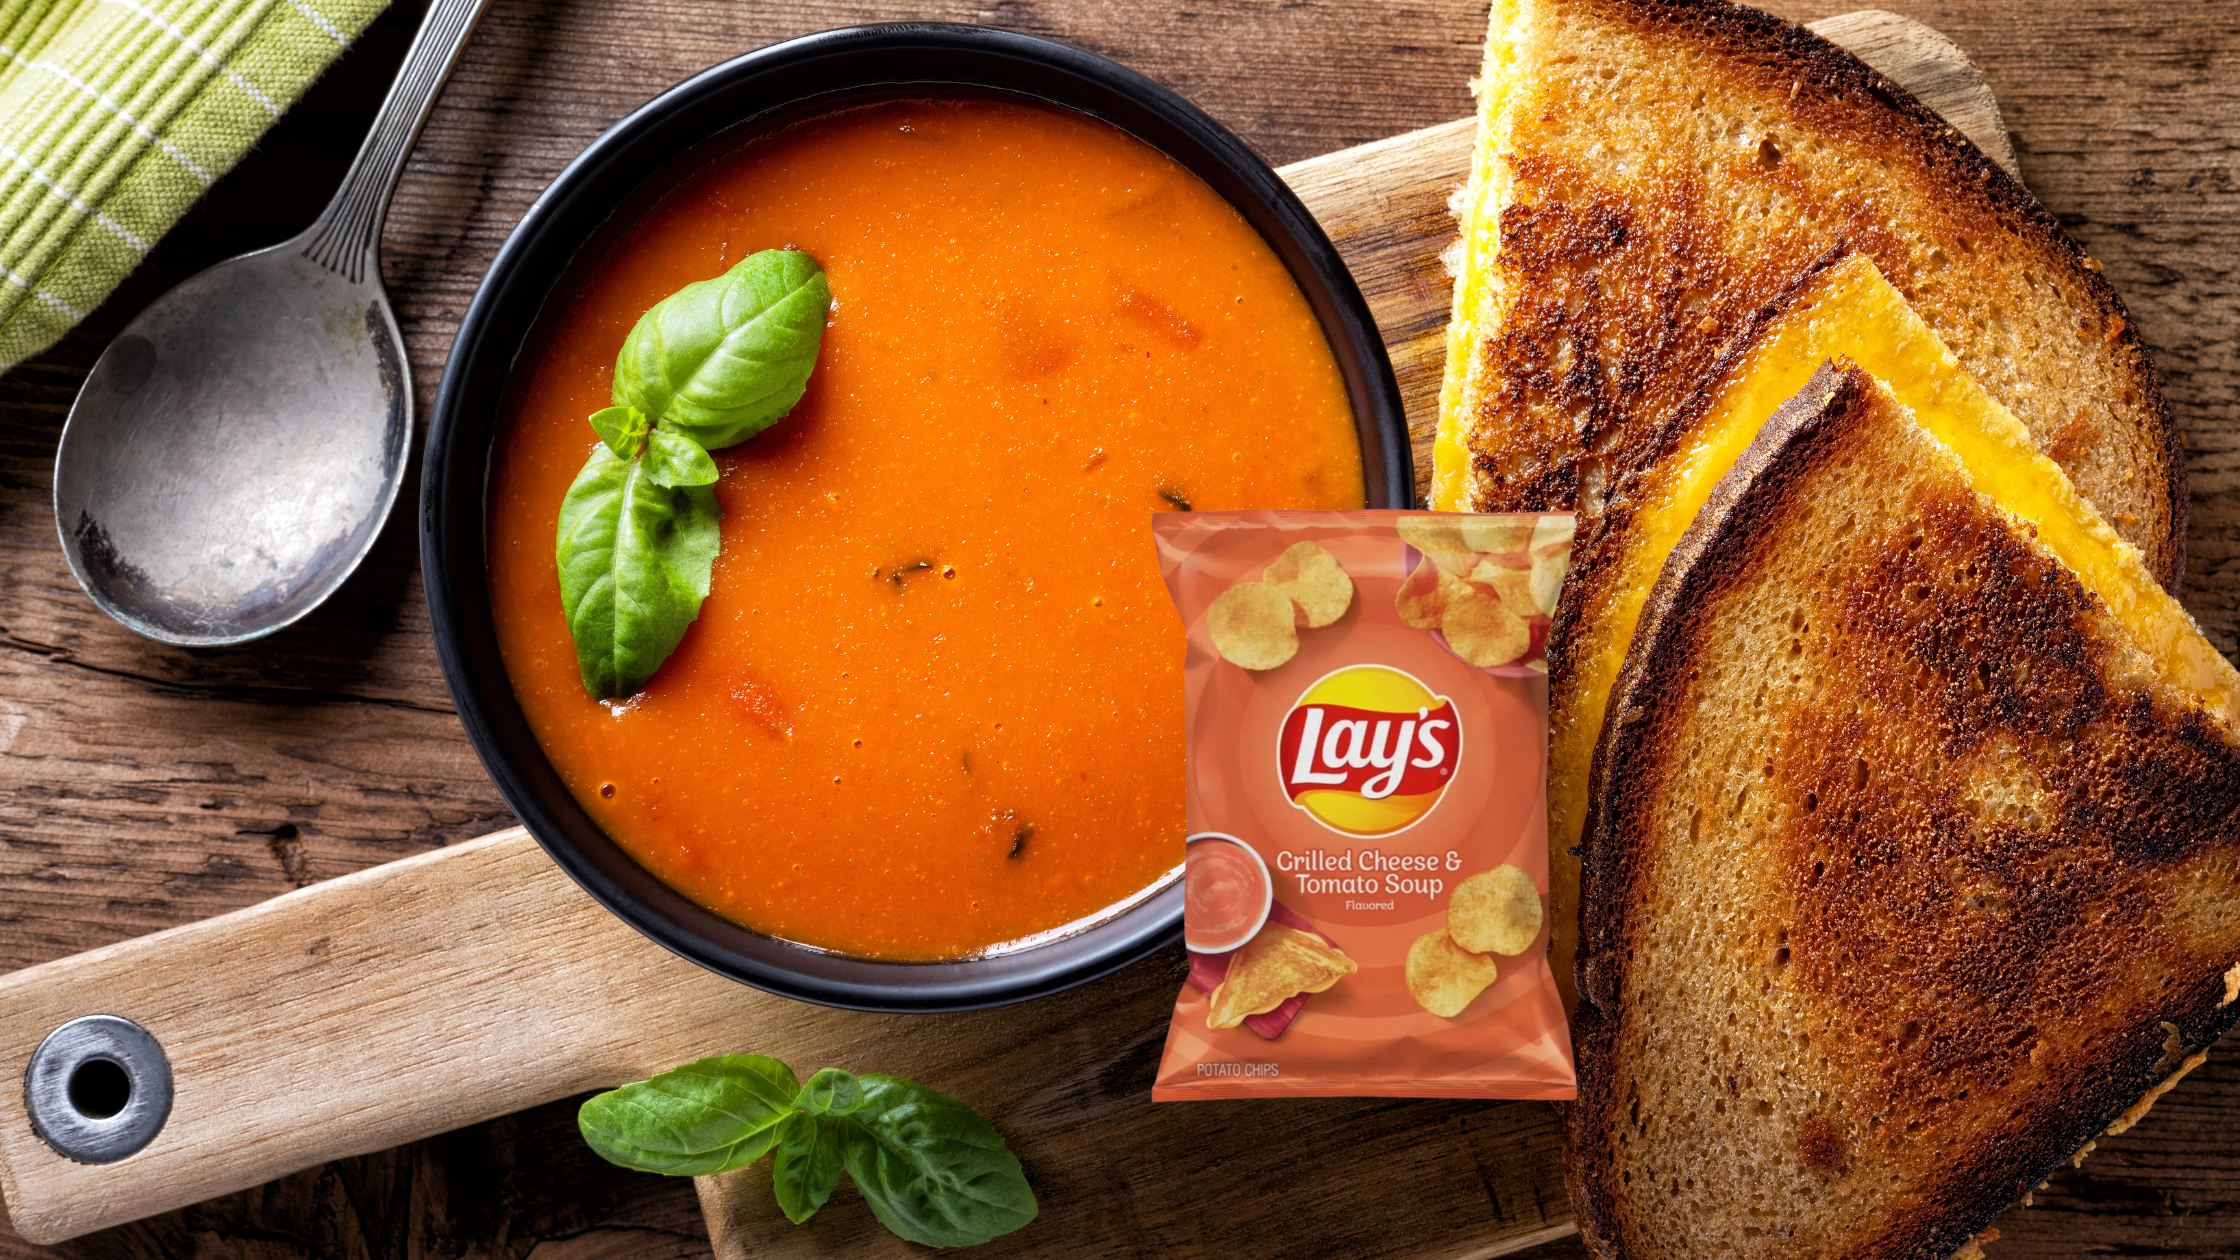 Lay’s Unveils Grilled Cheese & Tomato Soup Chips in New Collaboration